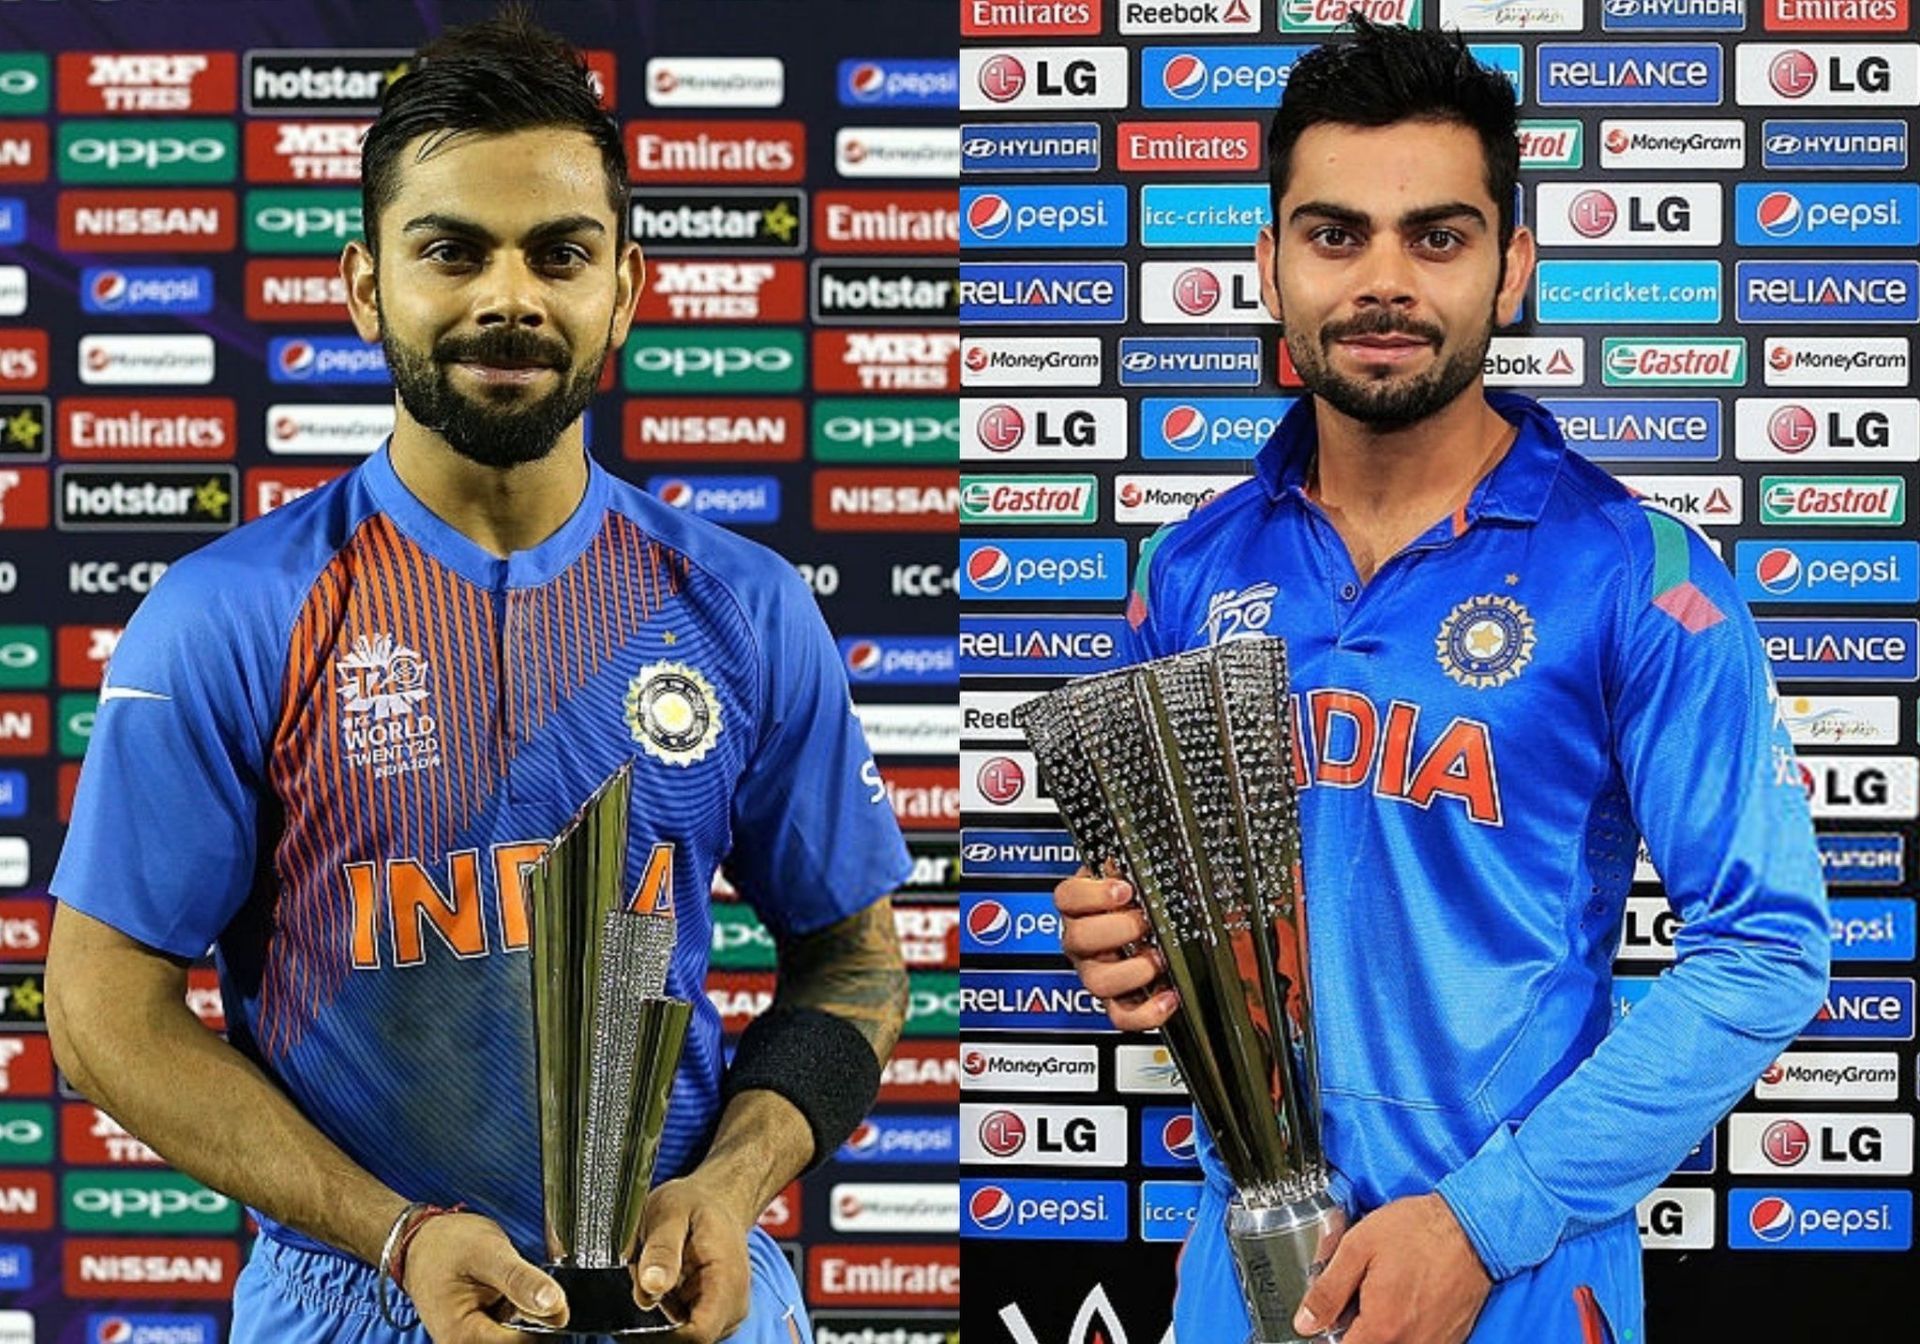 Virat Kohli won the Player of the Tournament at the T20 World Cup twice in his career